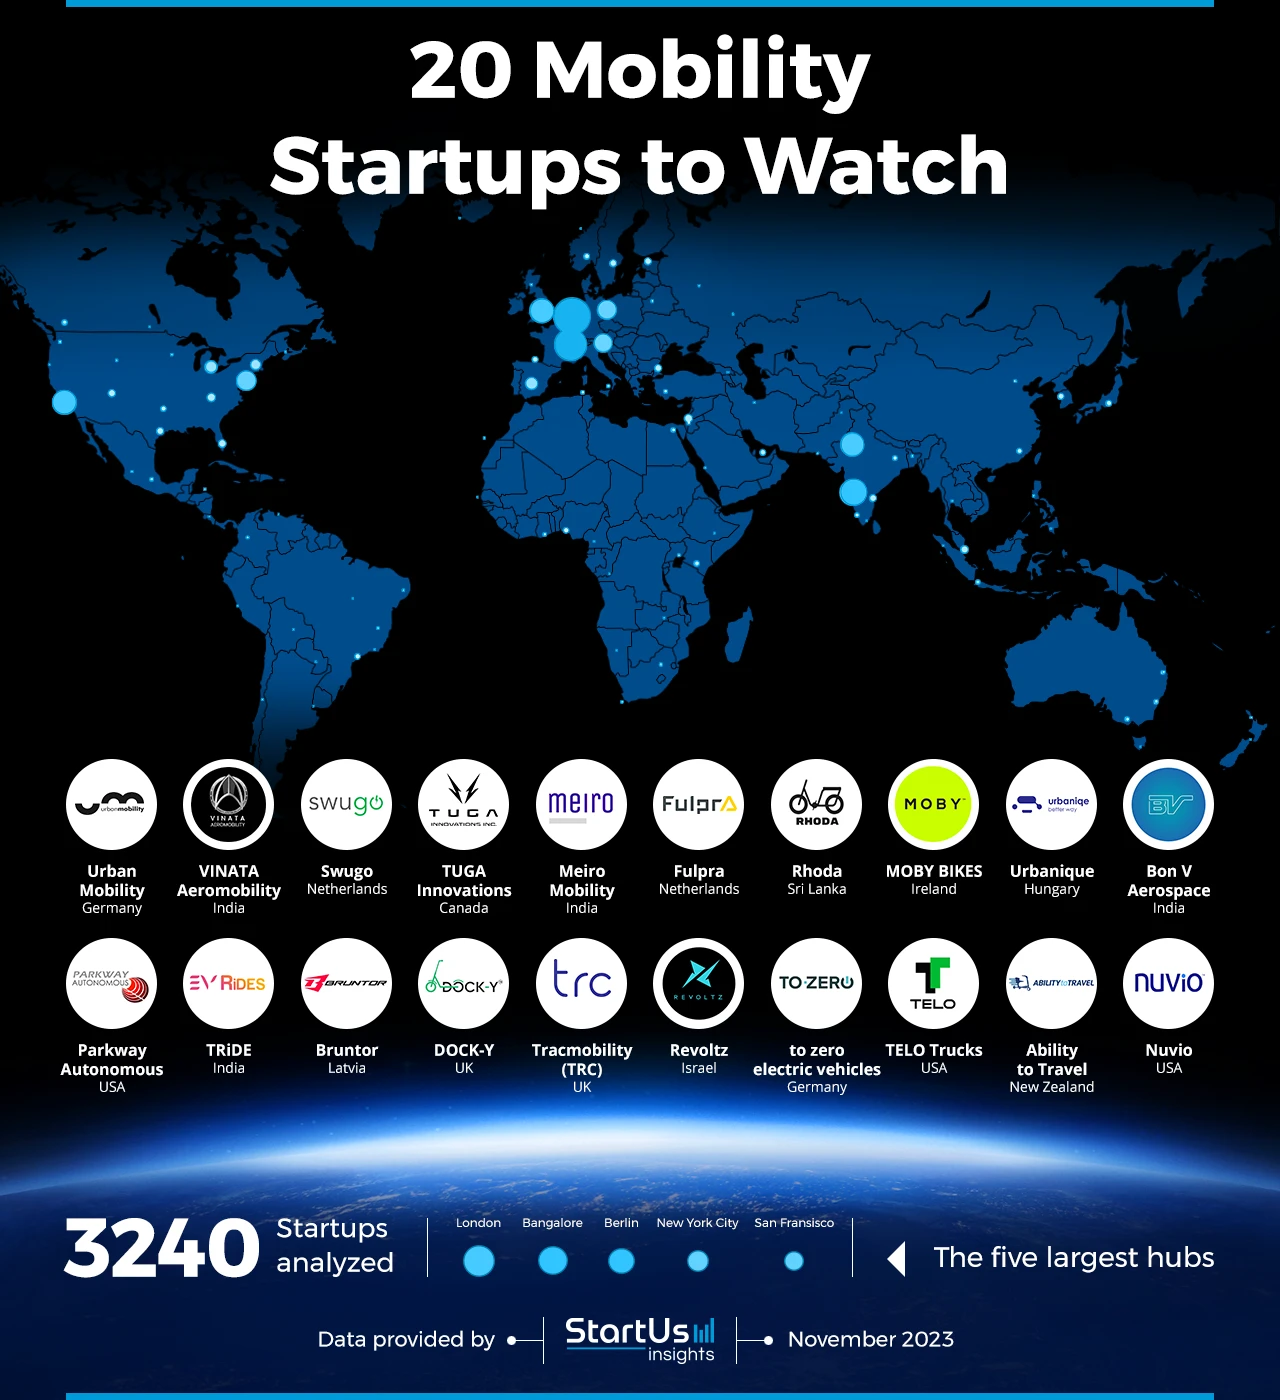 Mobility-Startups-to-Watch-Heat-Map-StartUs-Insights-noresize